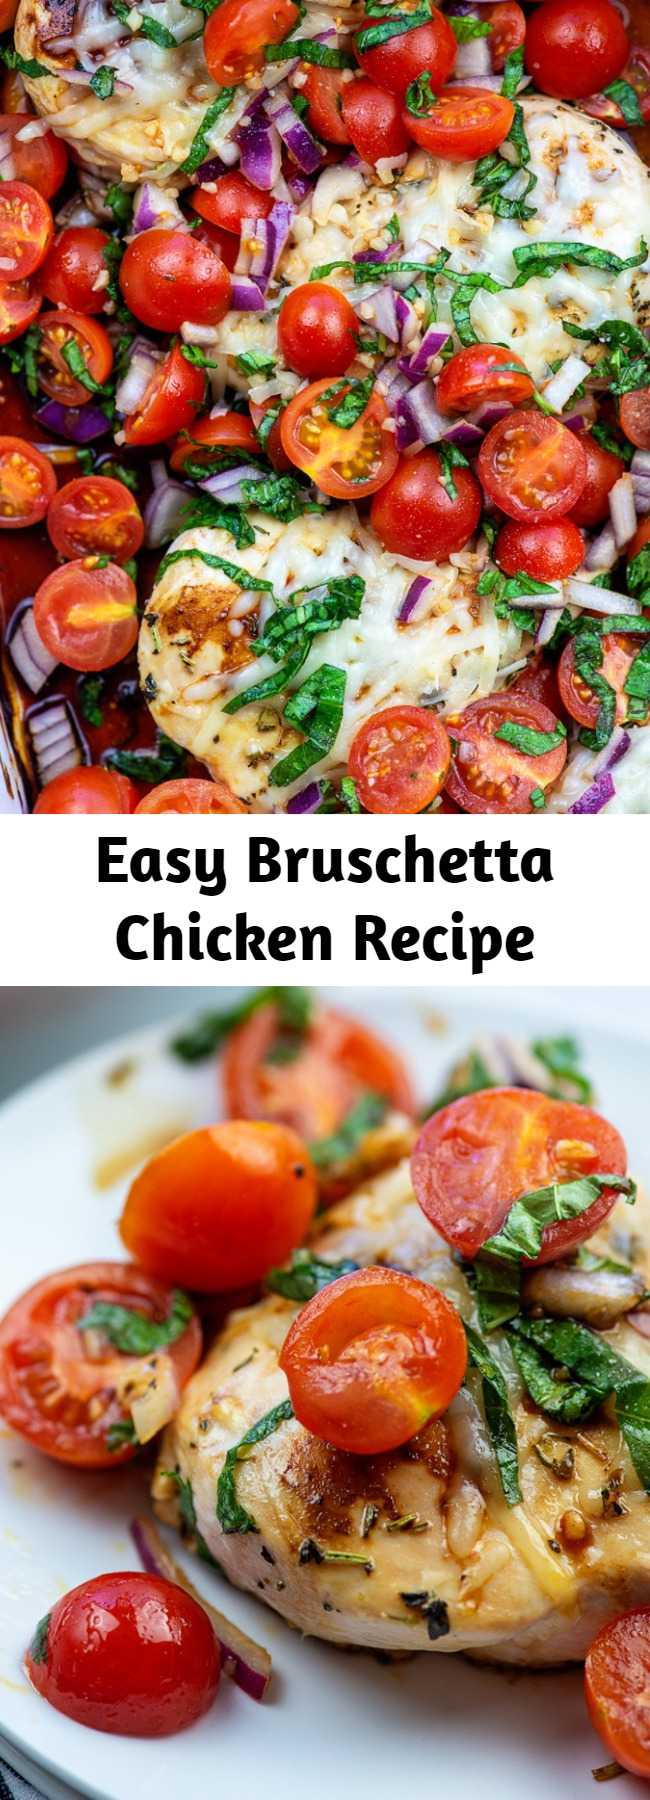 Easy Bruschetta Chicken Recipe - BRUSCHETTA CHICKEN made low carb! This delicious chicken recipe is so simple, but it’s packing some serious flavor. This is amazing served over zucchini noodles or with a side salad. #recipe #lowcarb #keto #chicken